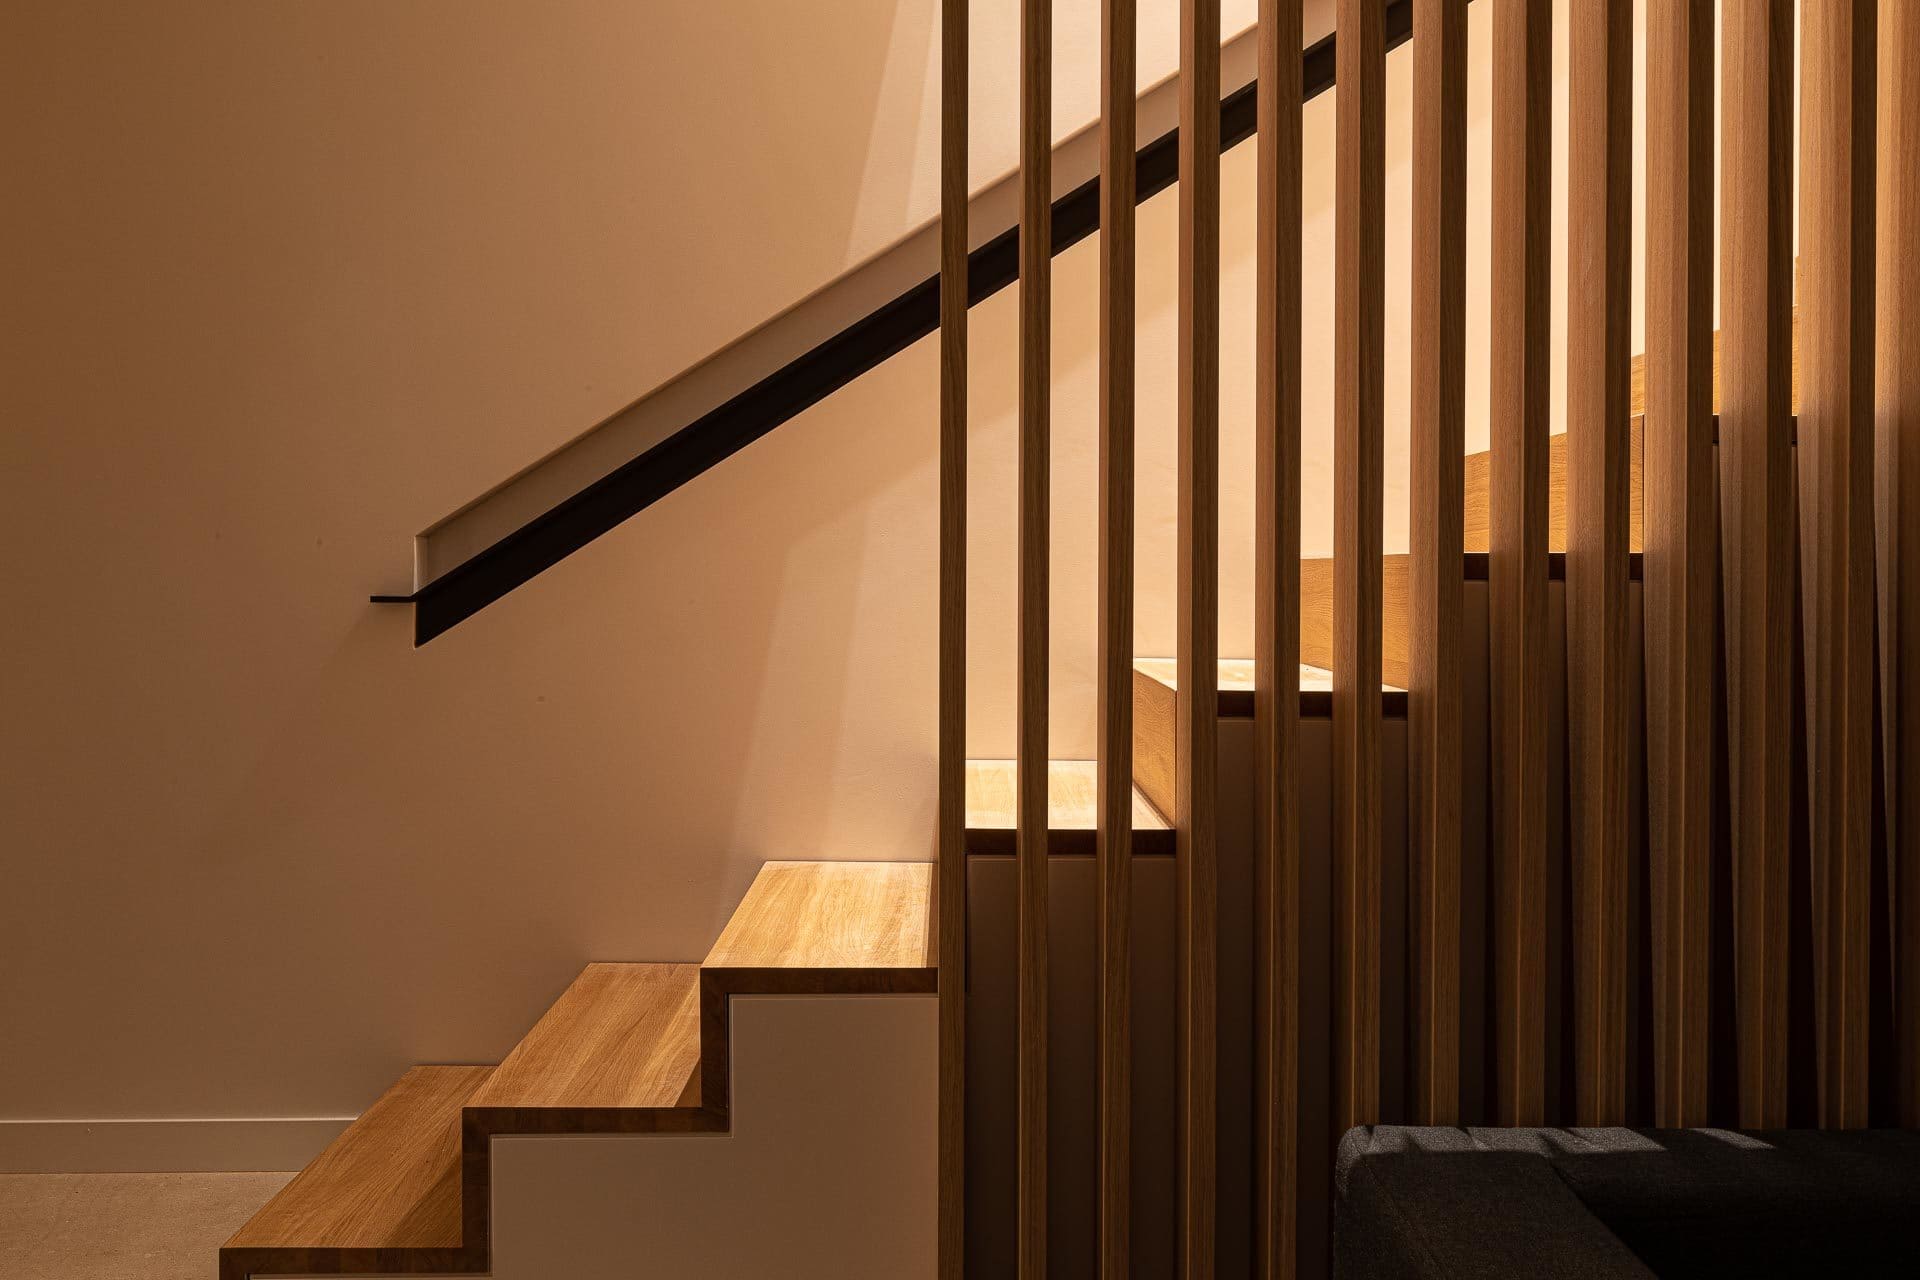 Design of the atmosphere of luxury stairs